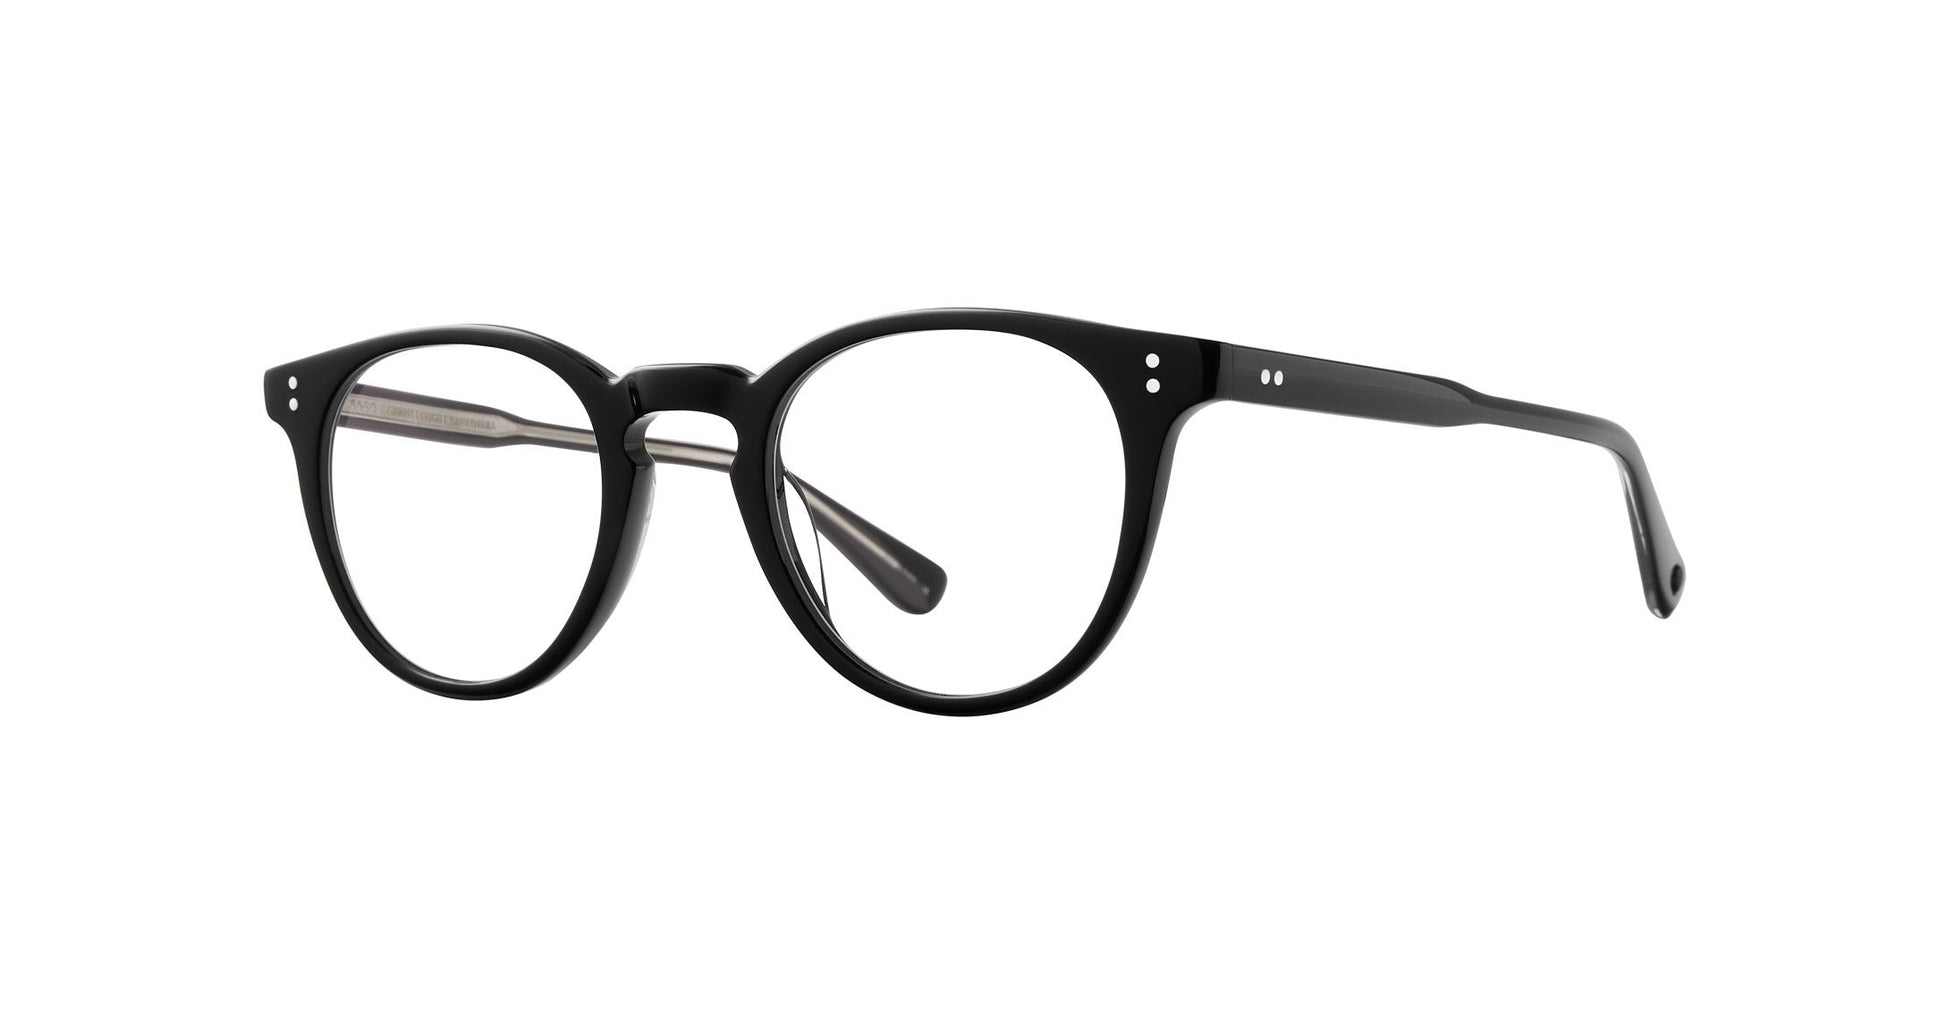 A bold silhouette and minimal hardware make the Clement Black striking in its simplicity. Thoughtfully pared back with a new temple design, these eyeglasses evoke the spirit of Andy Warhol. Handcrafted in California. Now Available in Toronto, Canada.